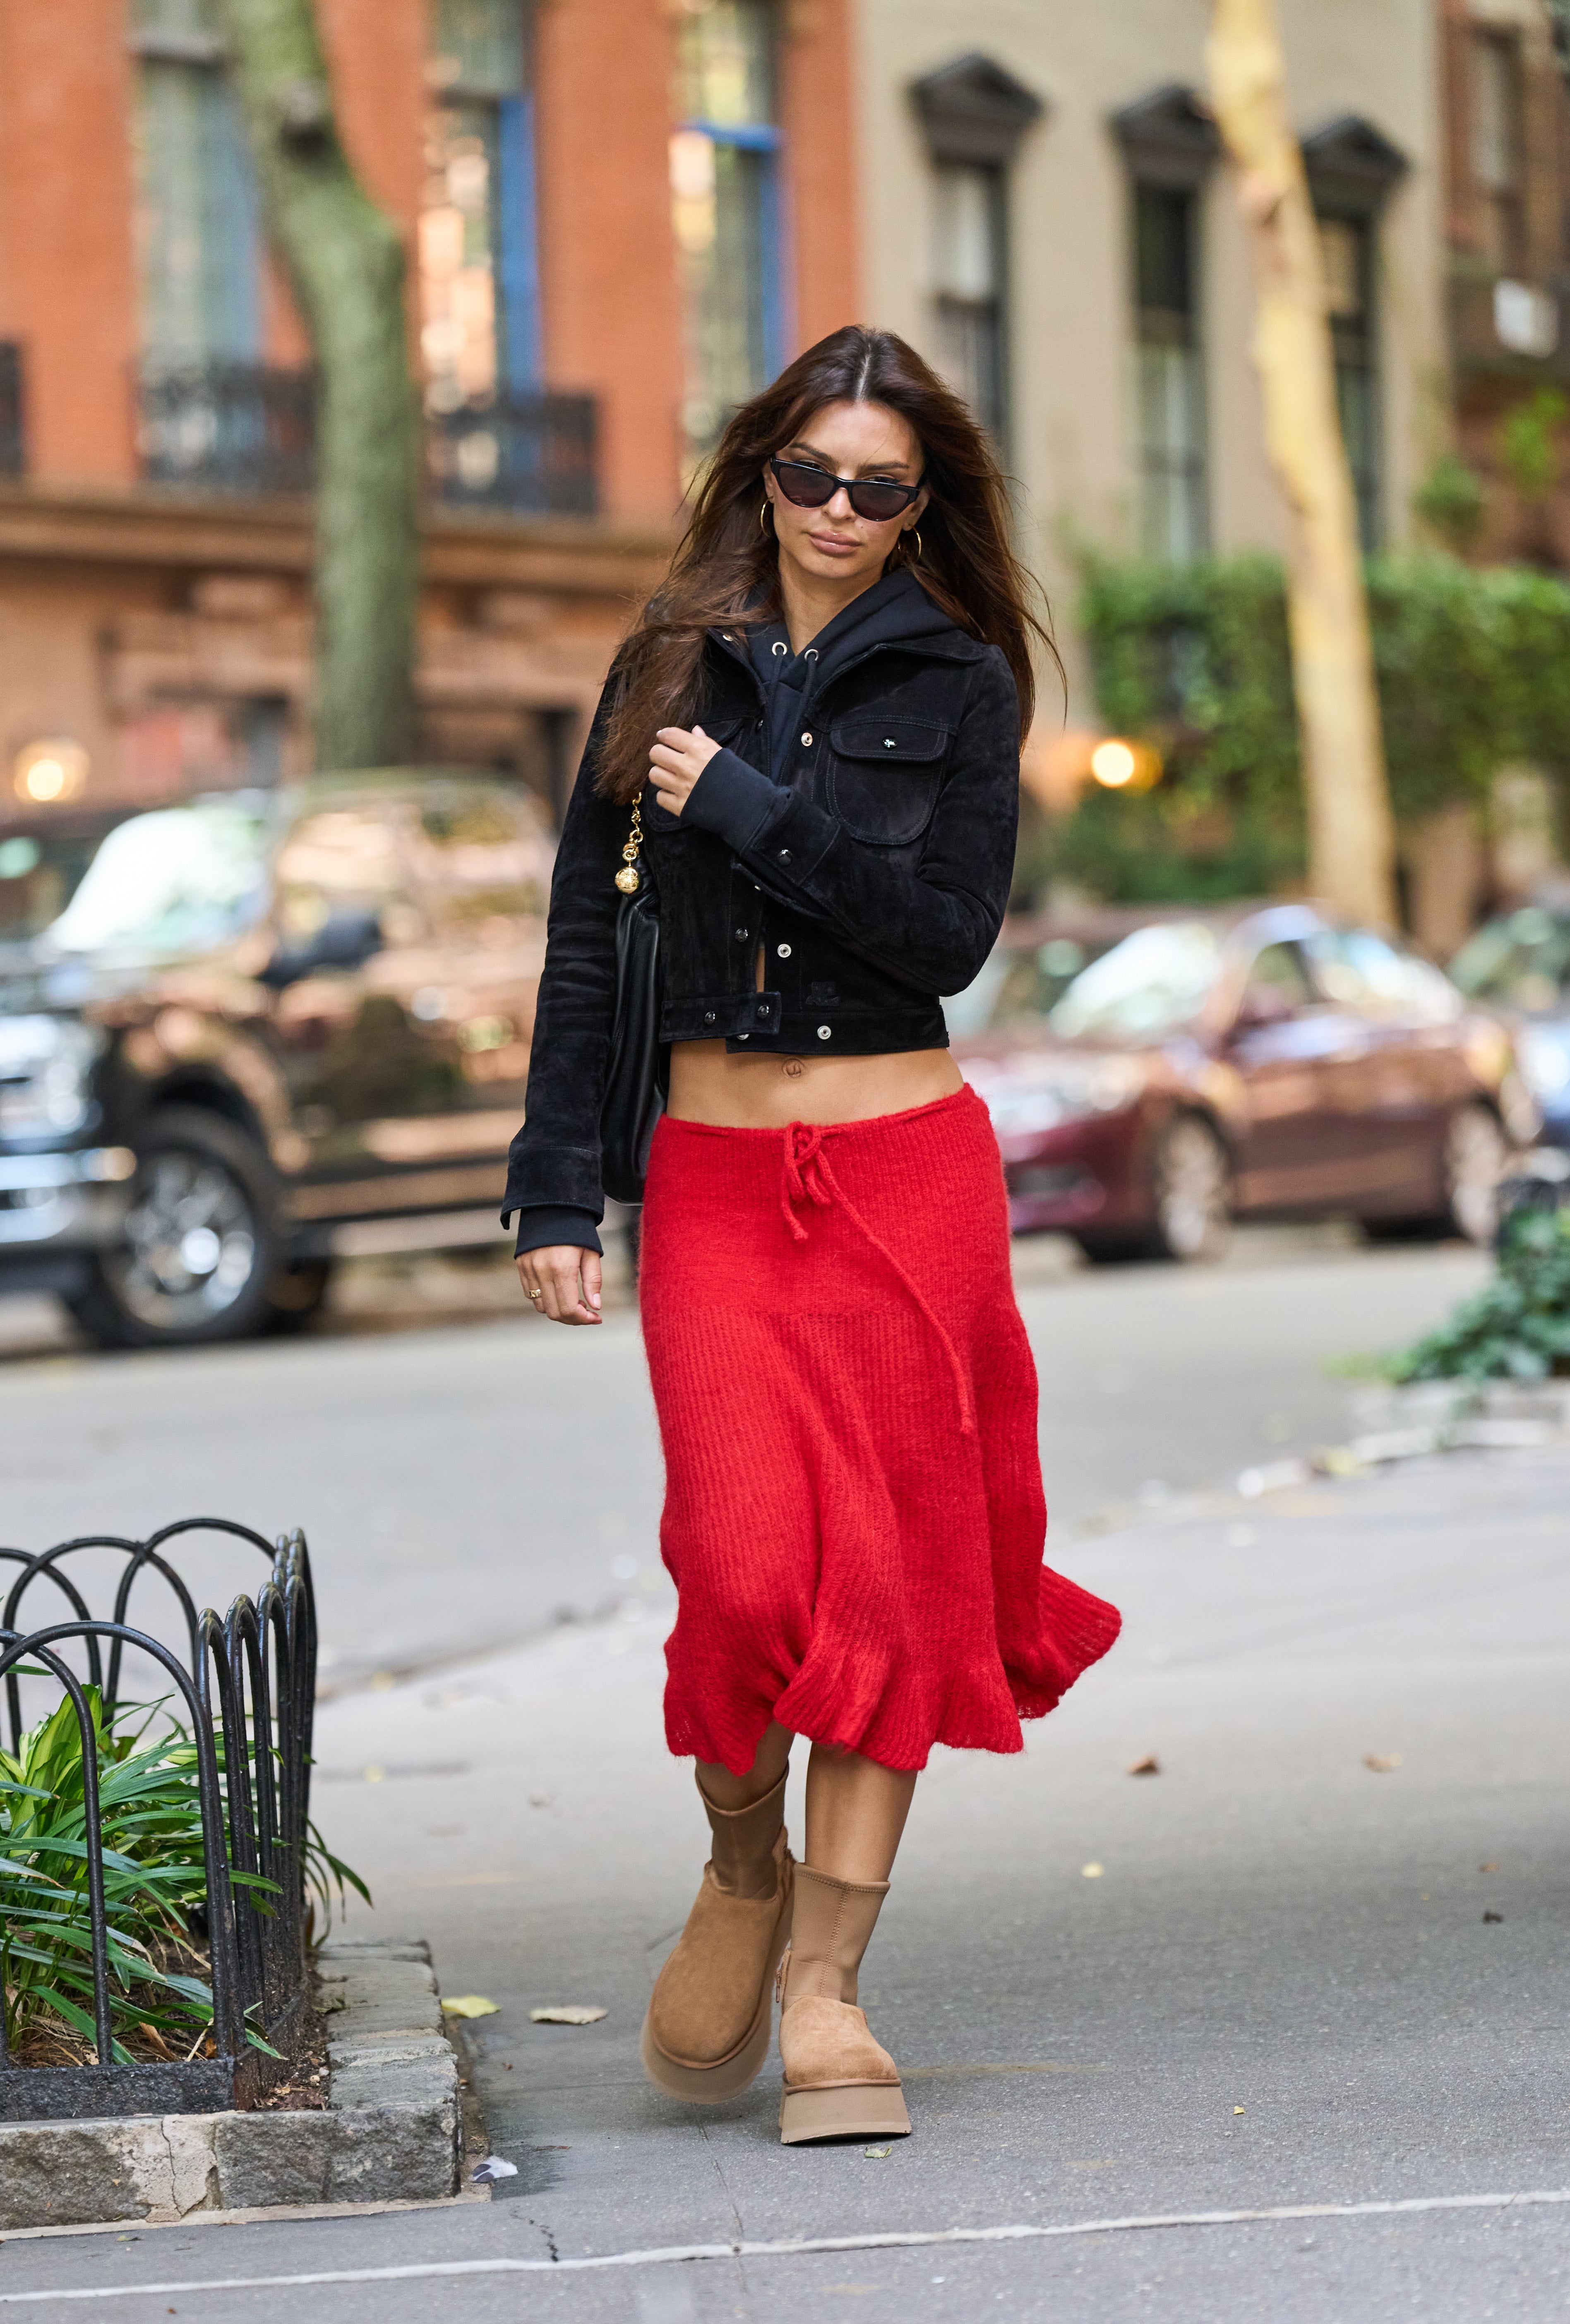 On trend: Emily Ratajkowski has been spotted wearing Uggs recently